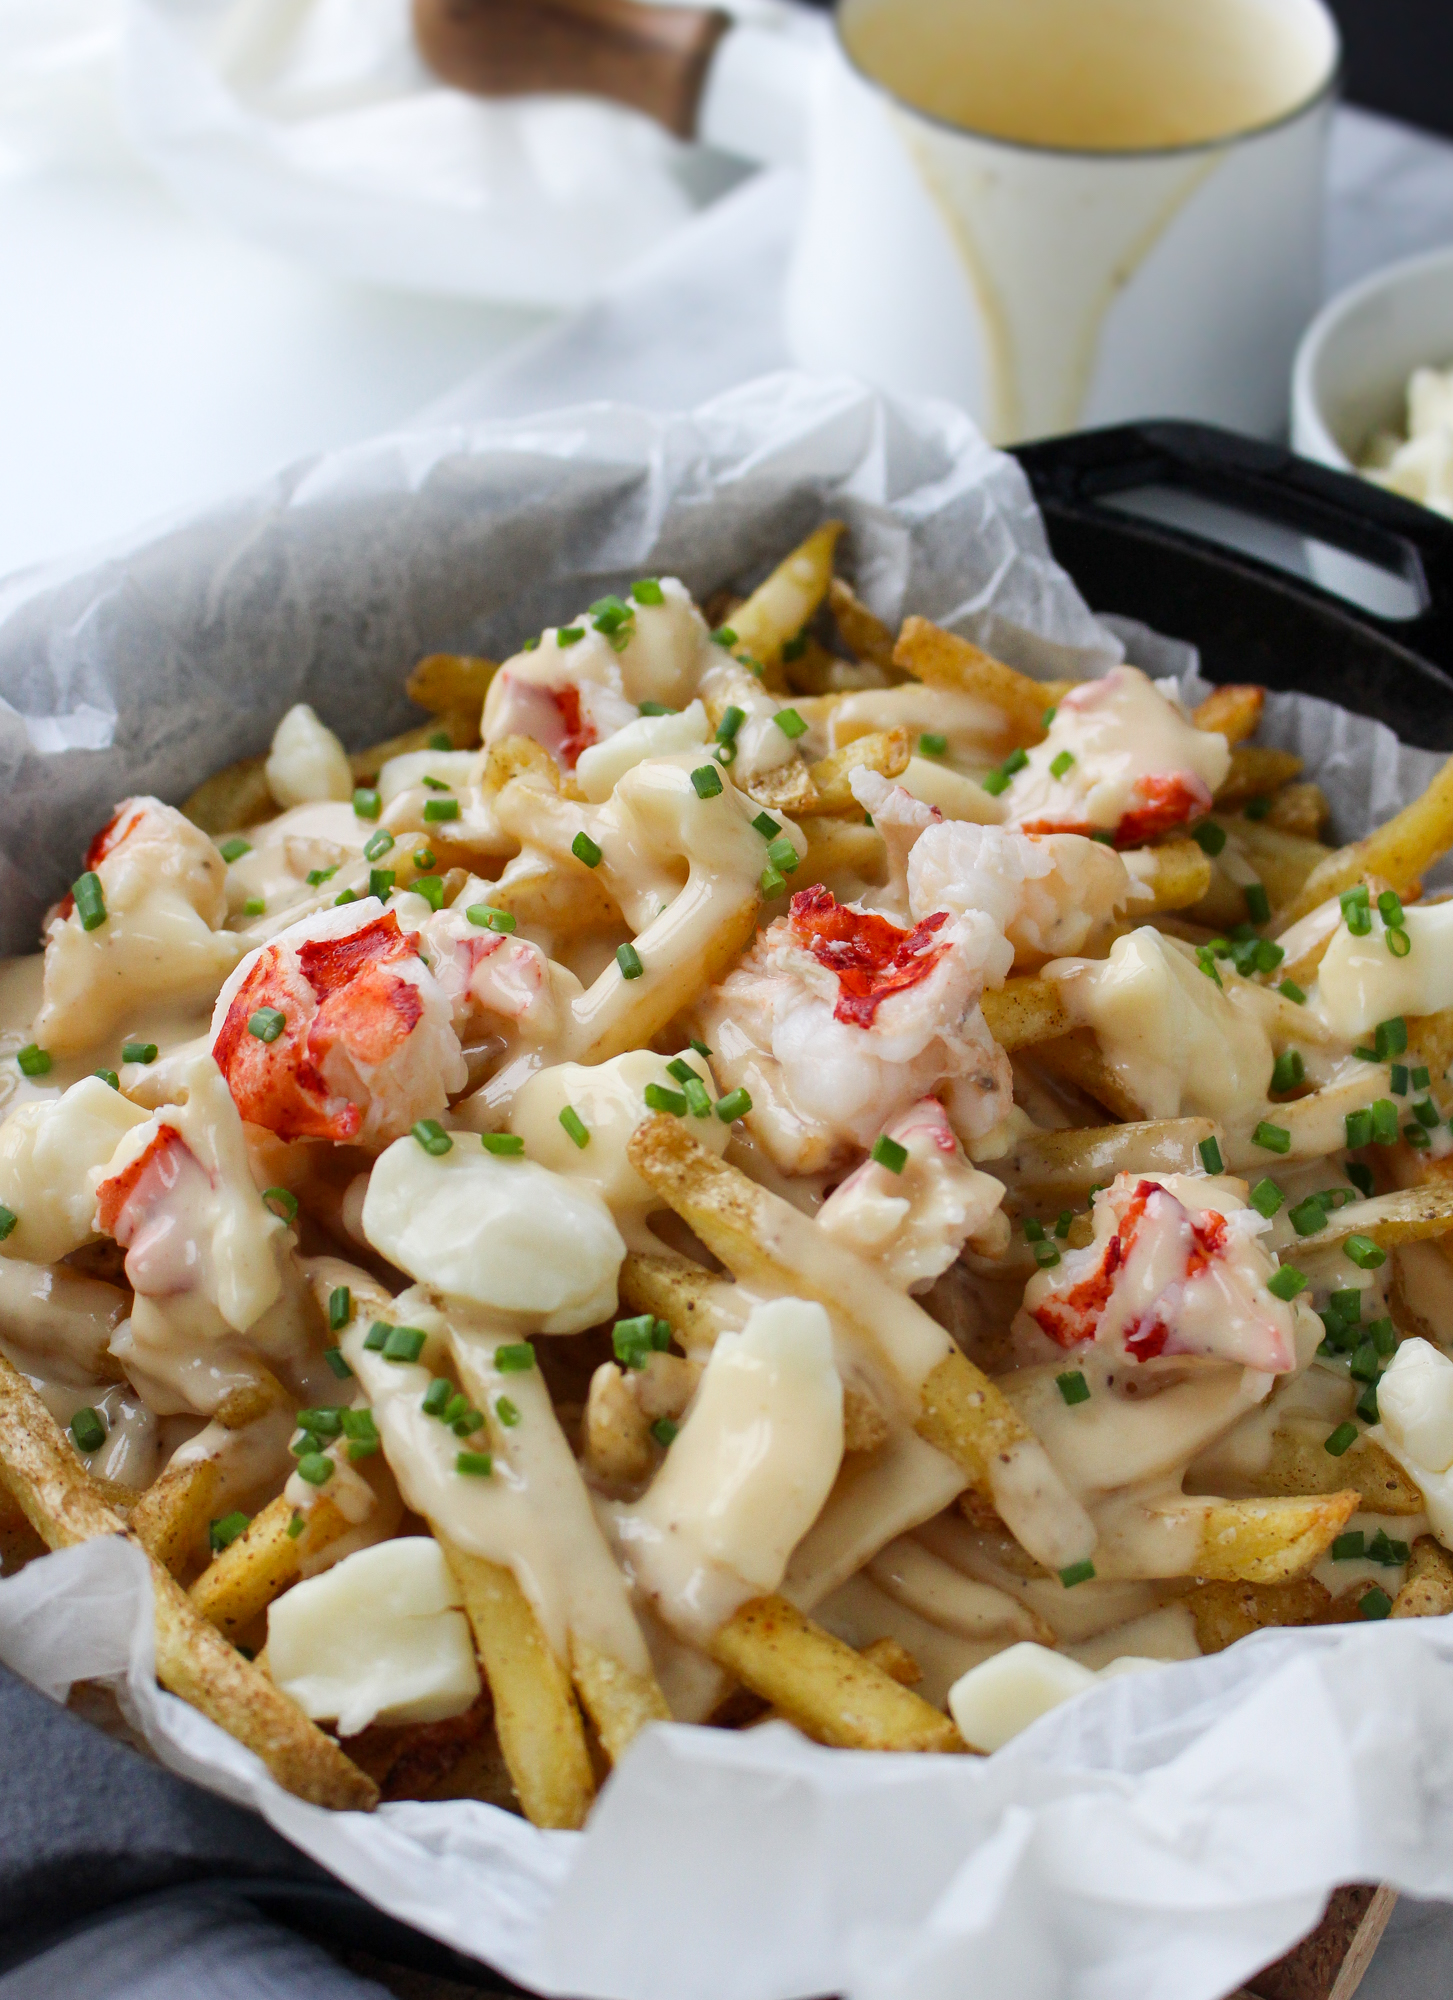 Lobster Poutine with Brown Butter Cheese Sauce - Yes to Yolks